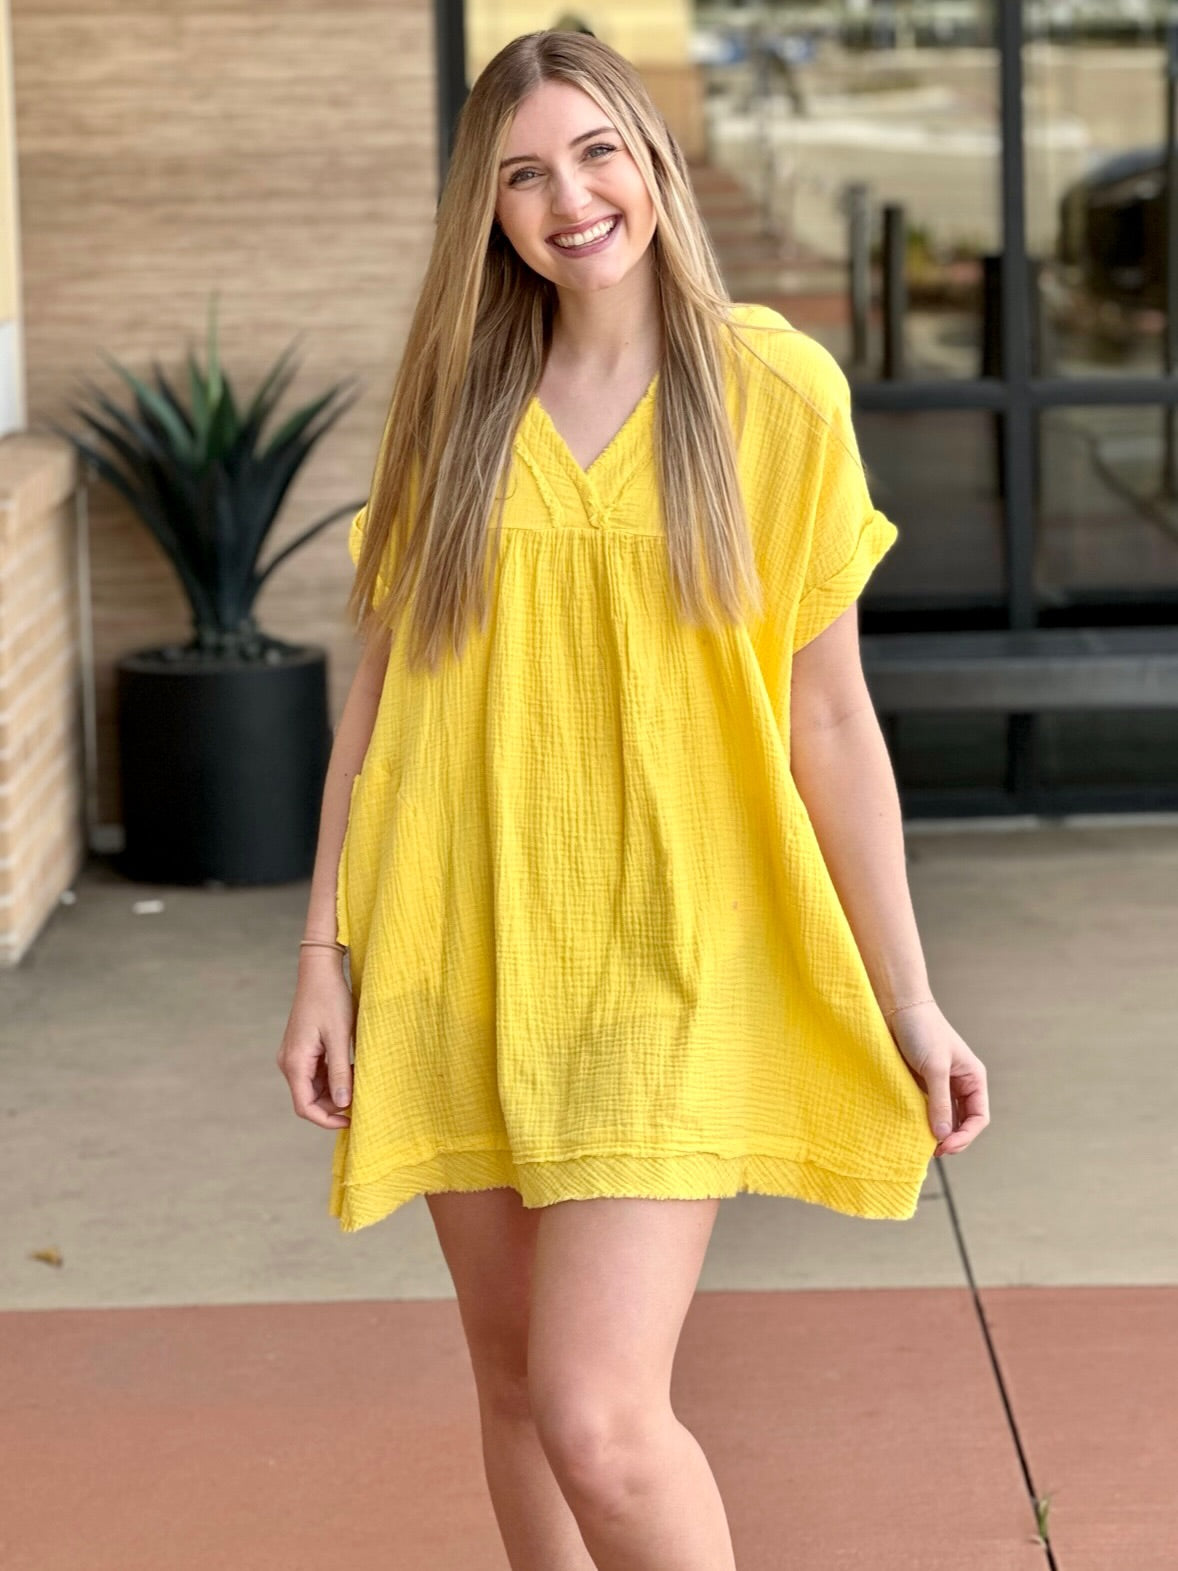 Lexi in yellow dress front view smiling